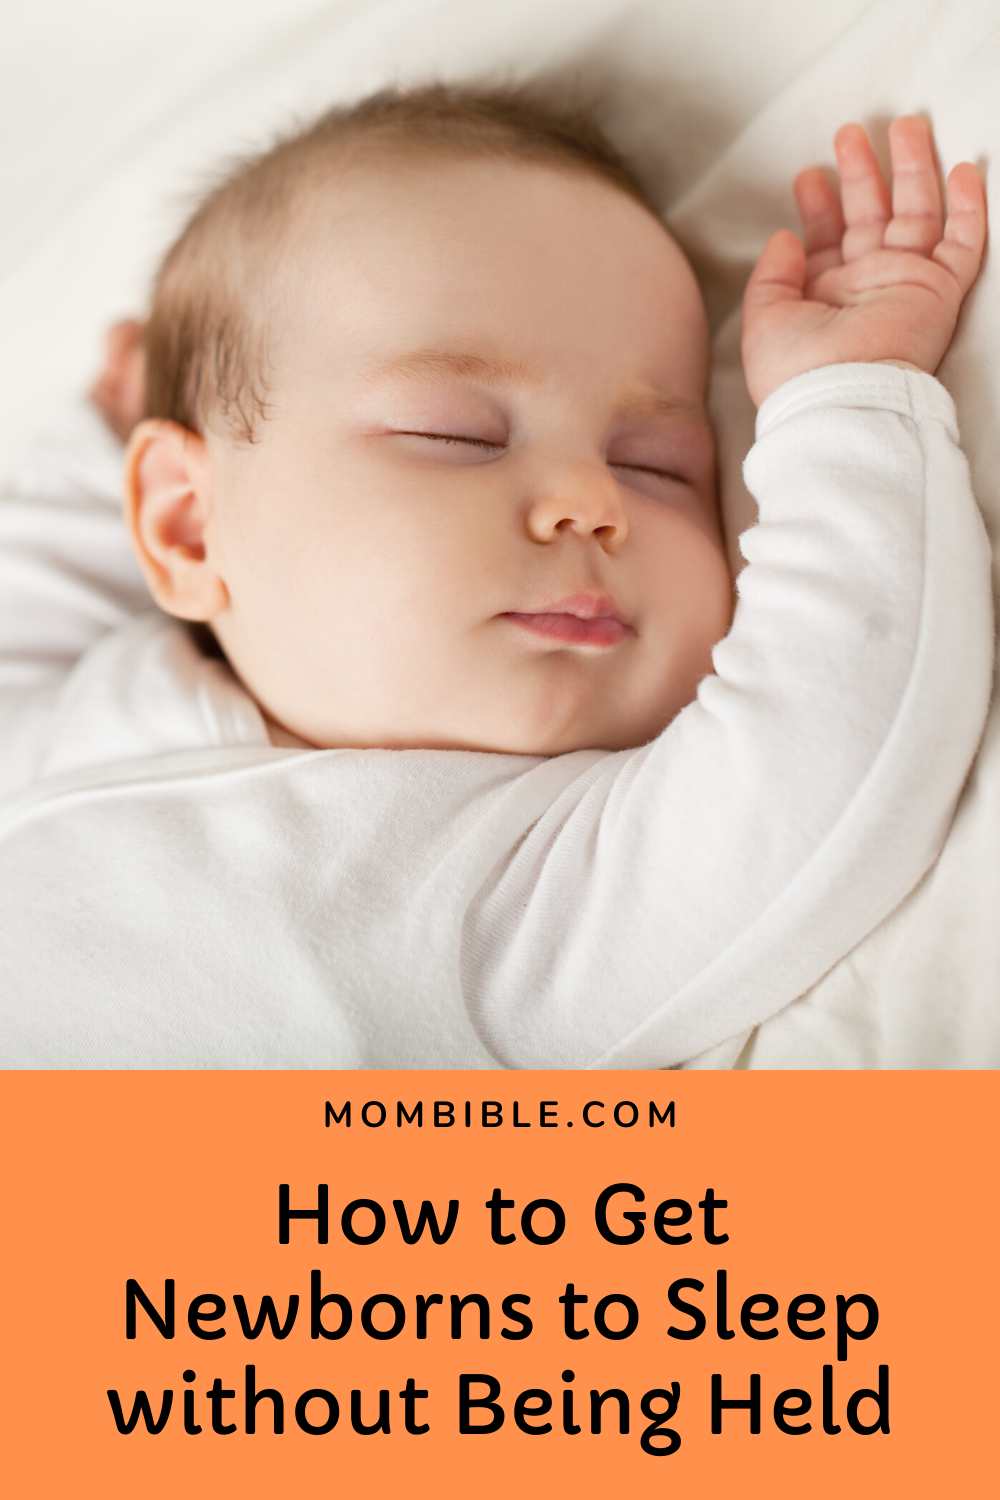 How to Get Newborns to Sleep without Being Held in 2020